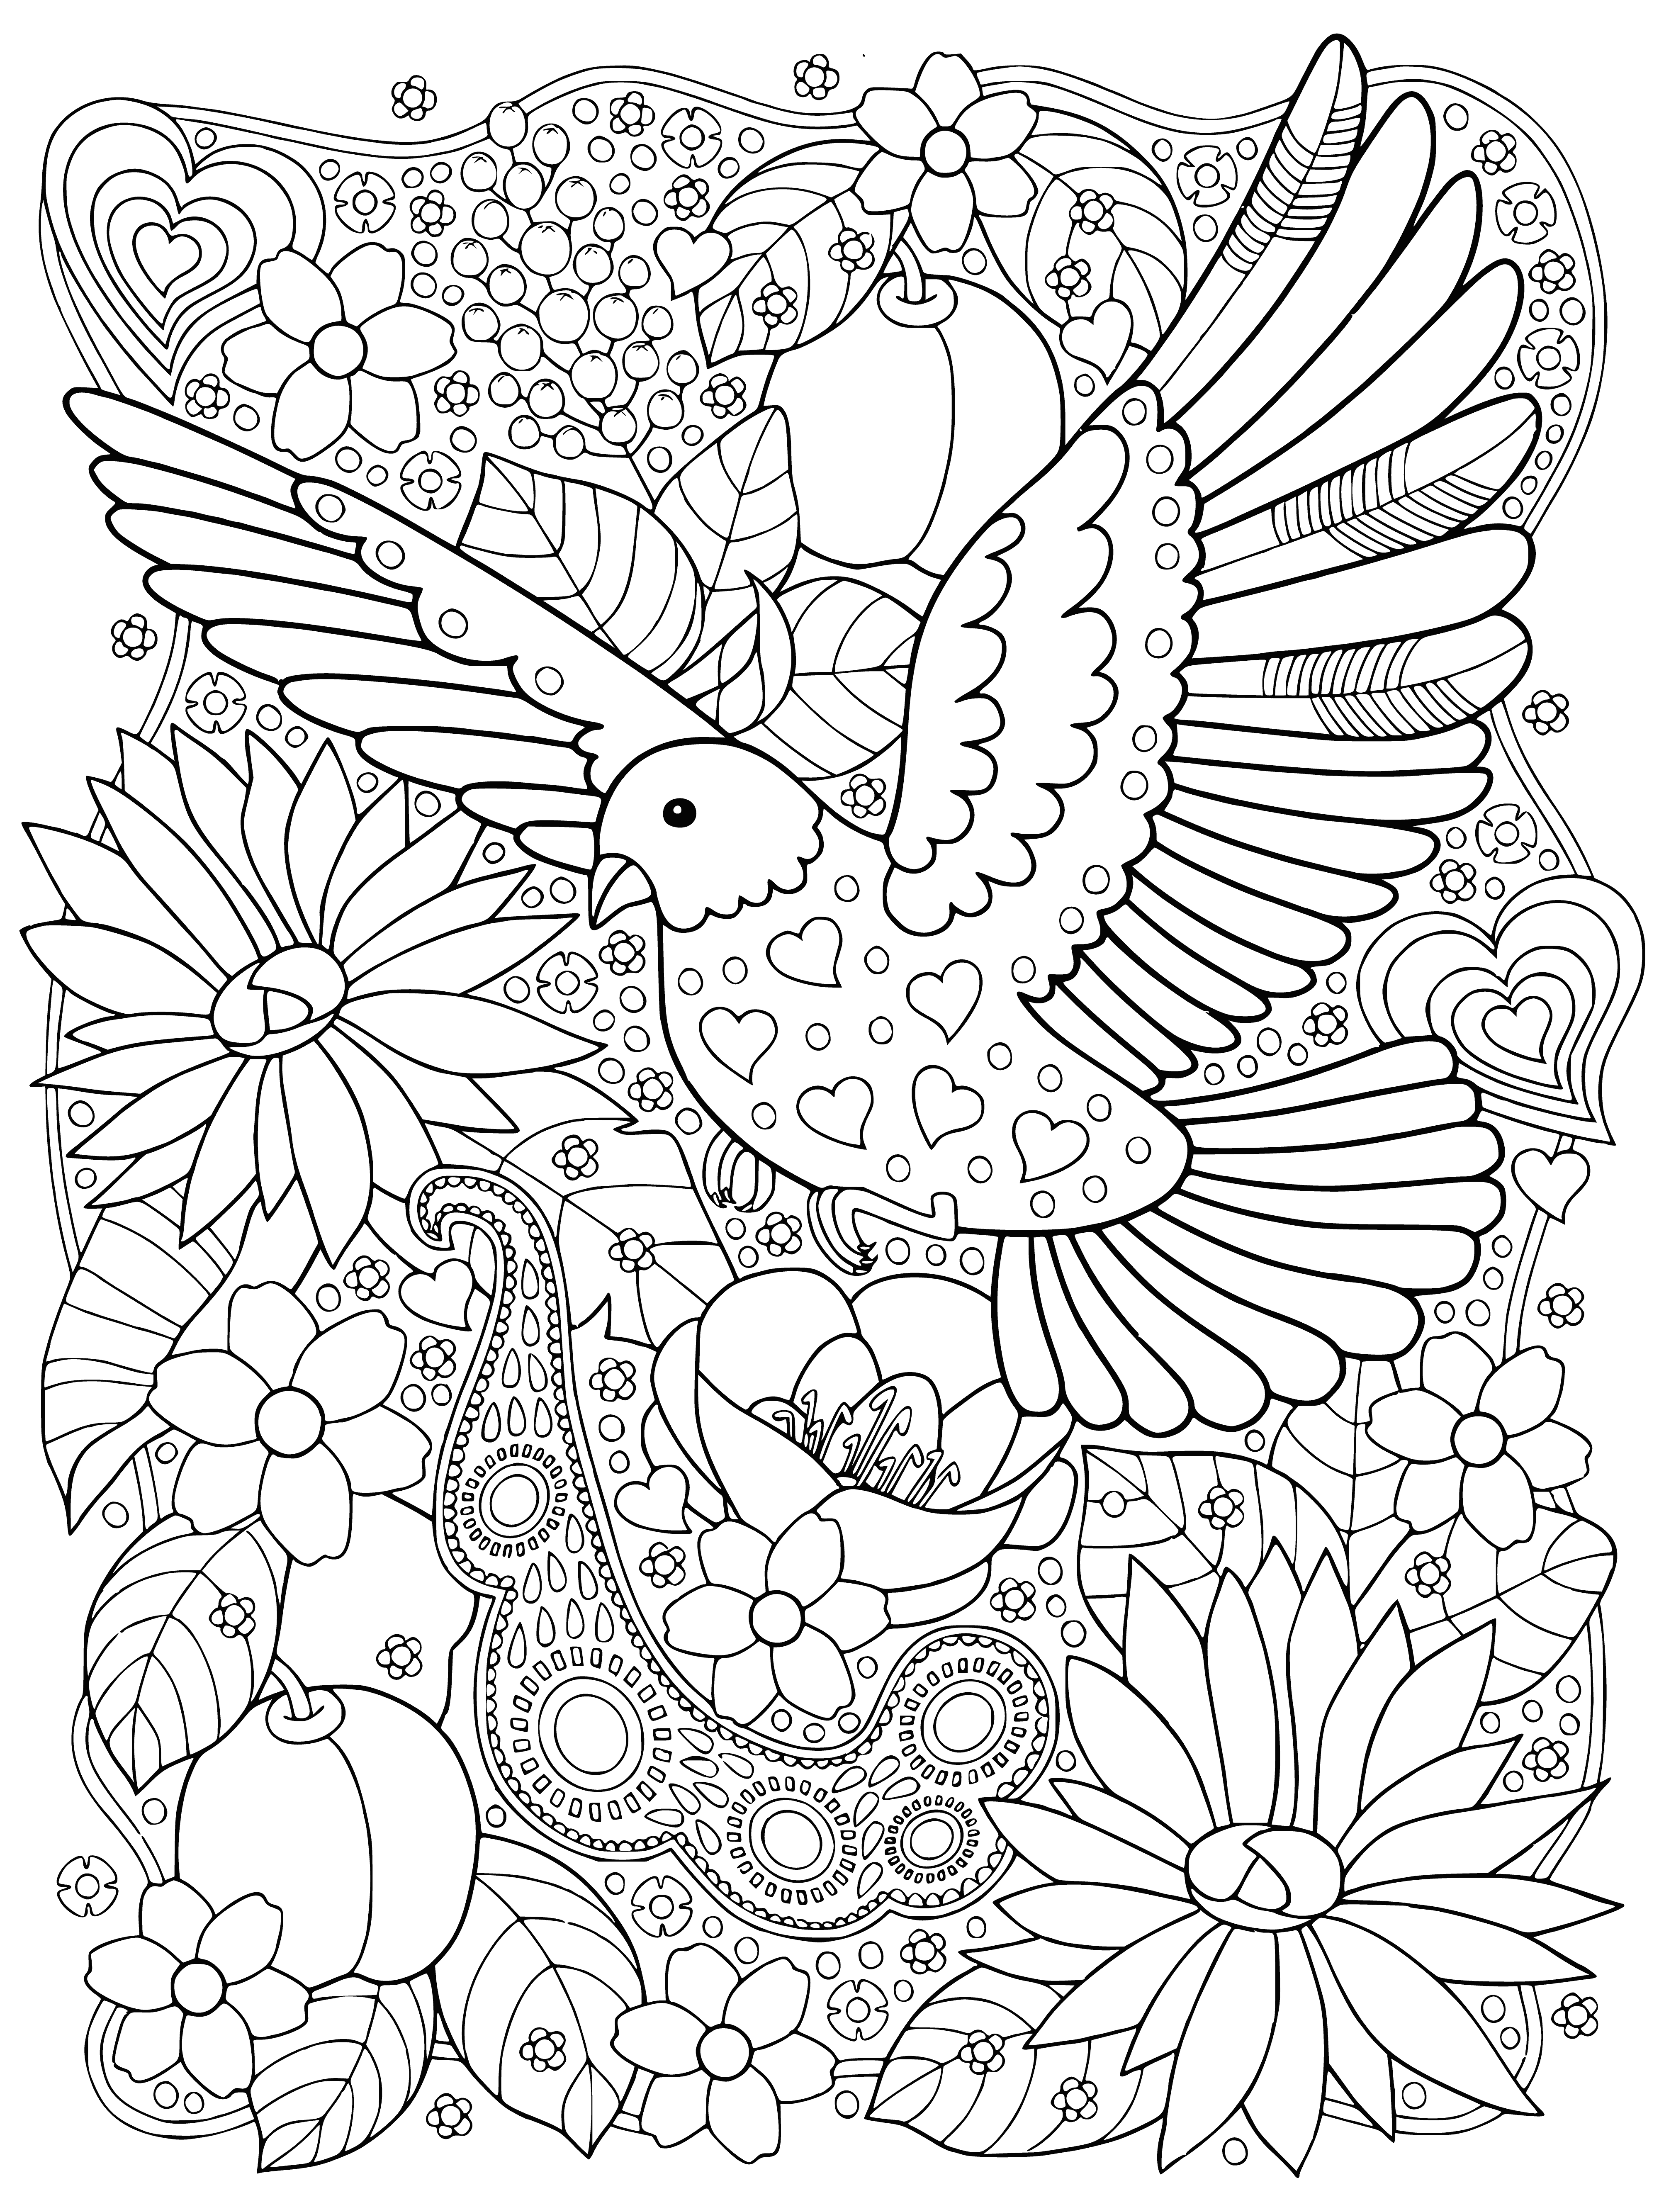 coloring page: Bird in garden looks calm & relaxed, surrounded by flowers & plants. Color & enjoy this peaceful scene!